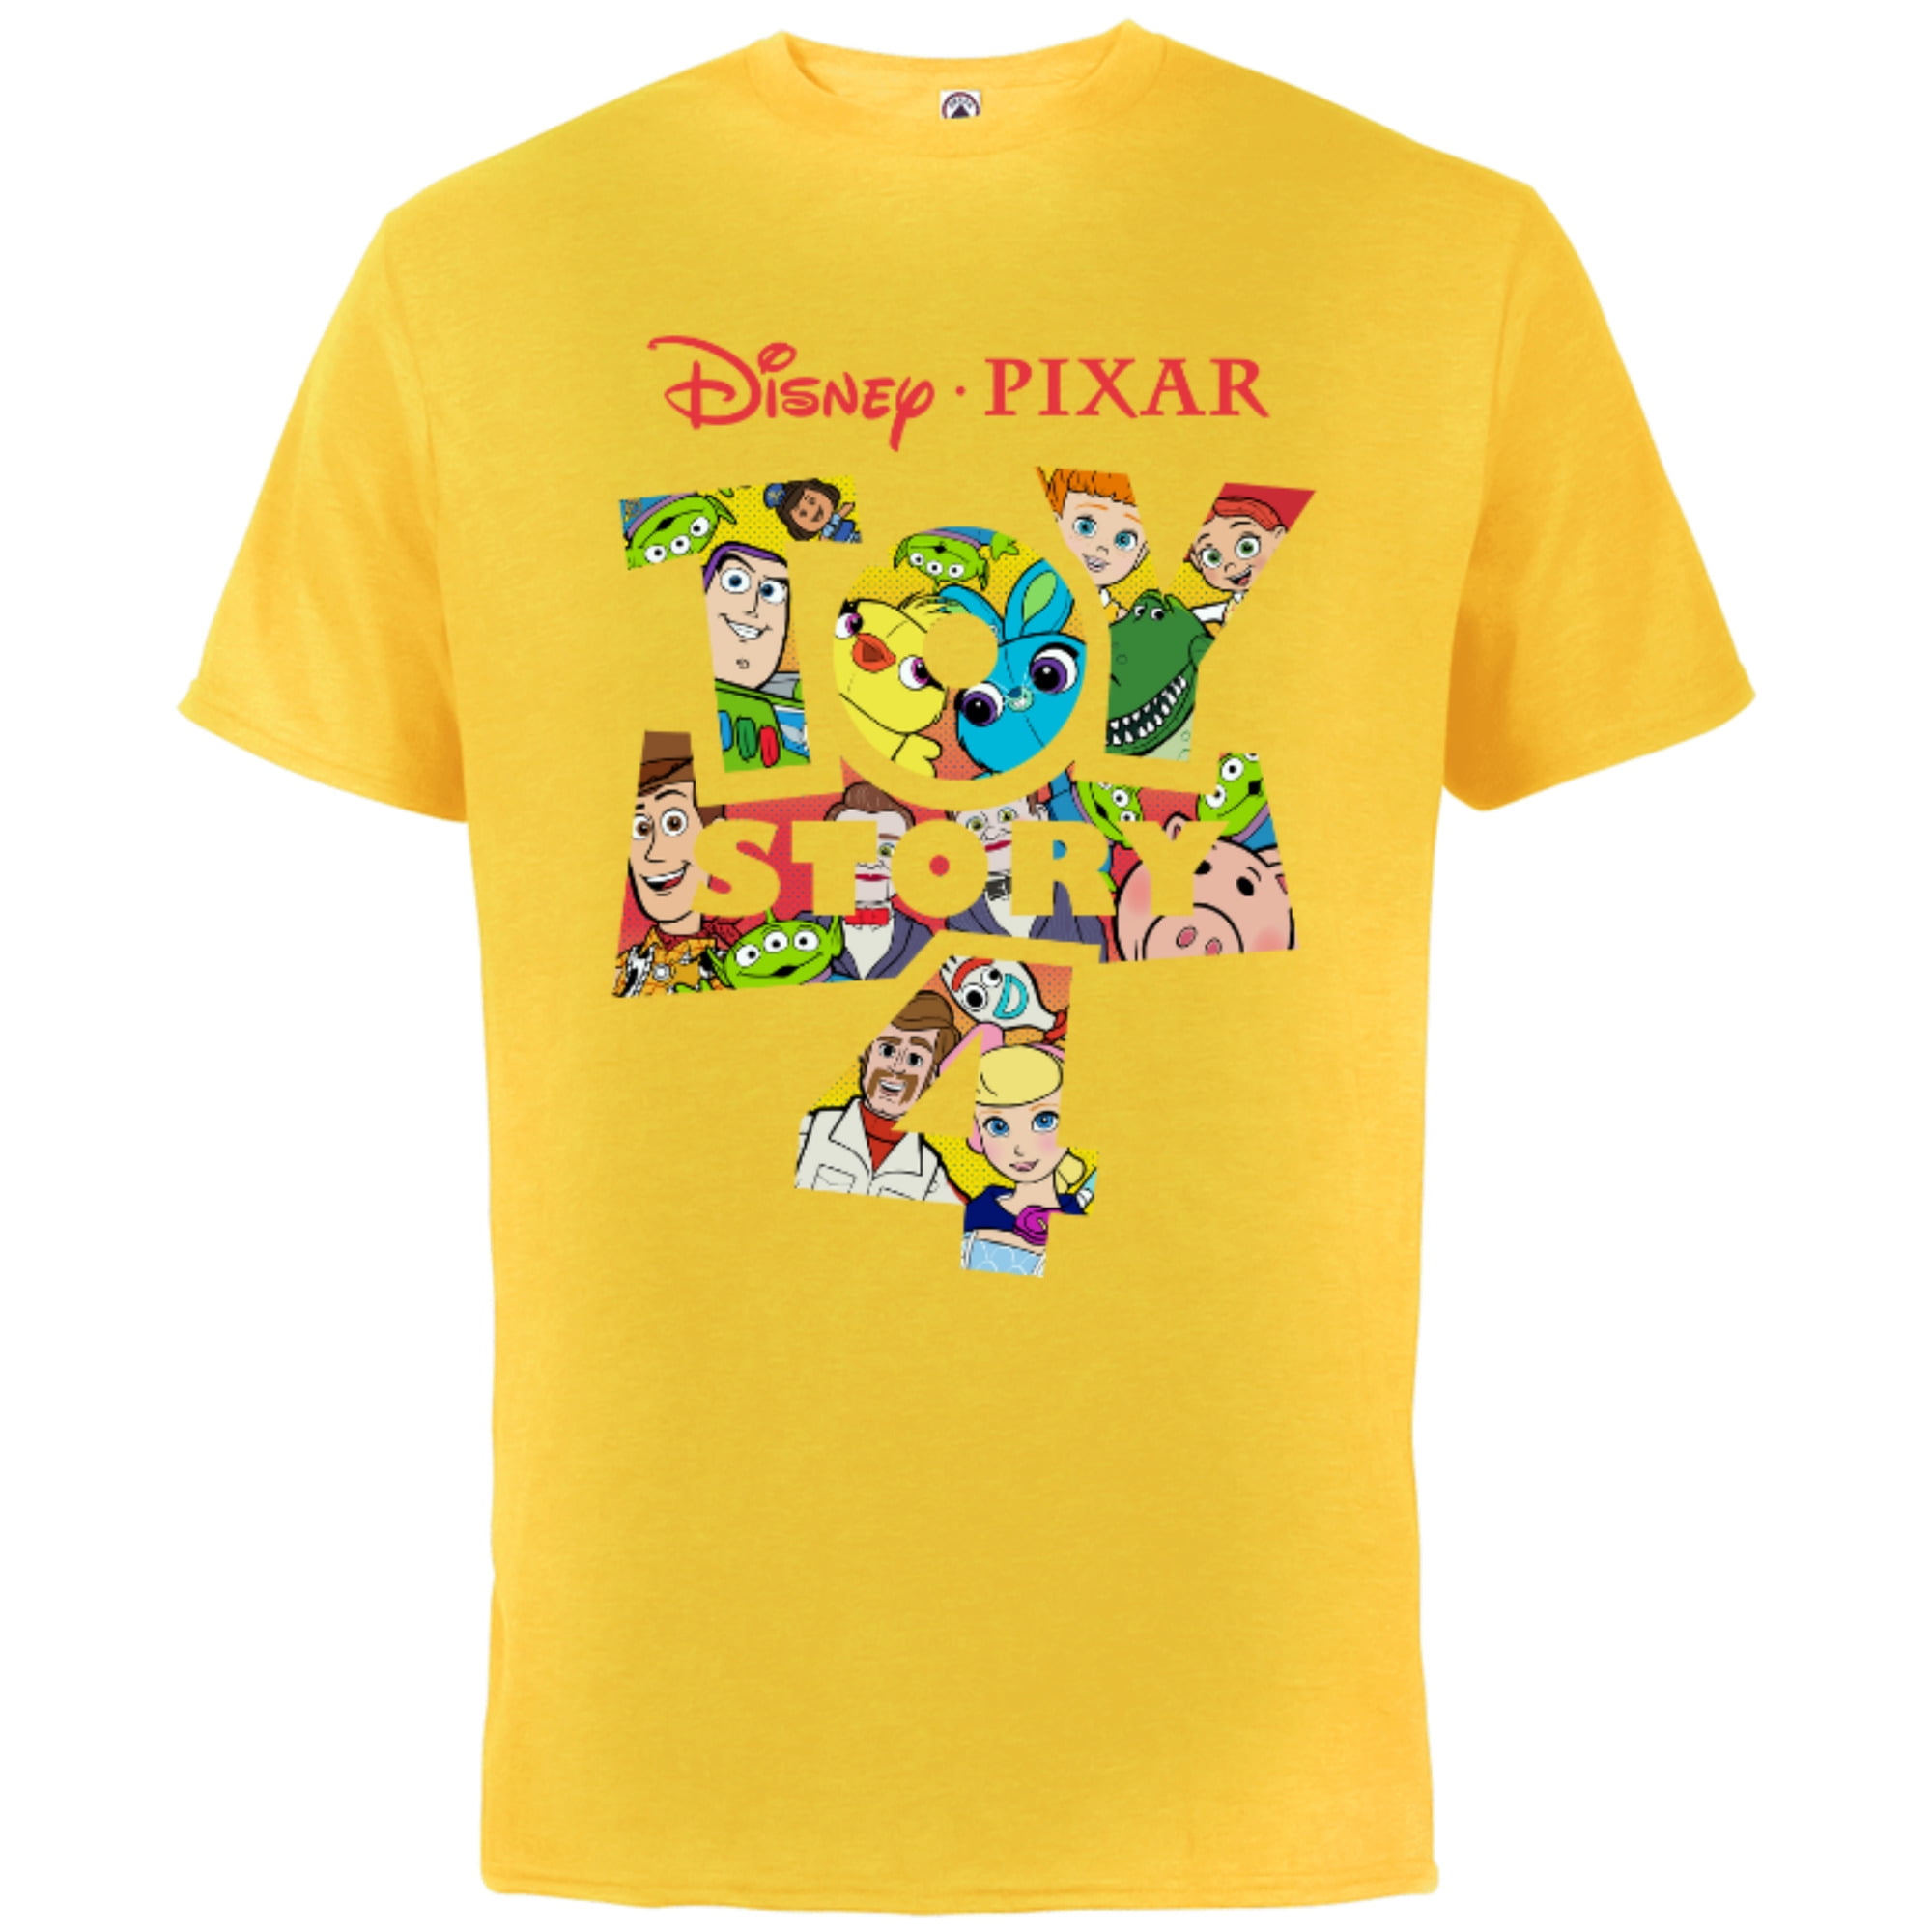 Disney Pixar Toy Story 4 Logo and Characters T-Shirt - Short Sleeve Cotton T -Shirt for Adults - Customized-White